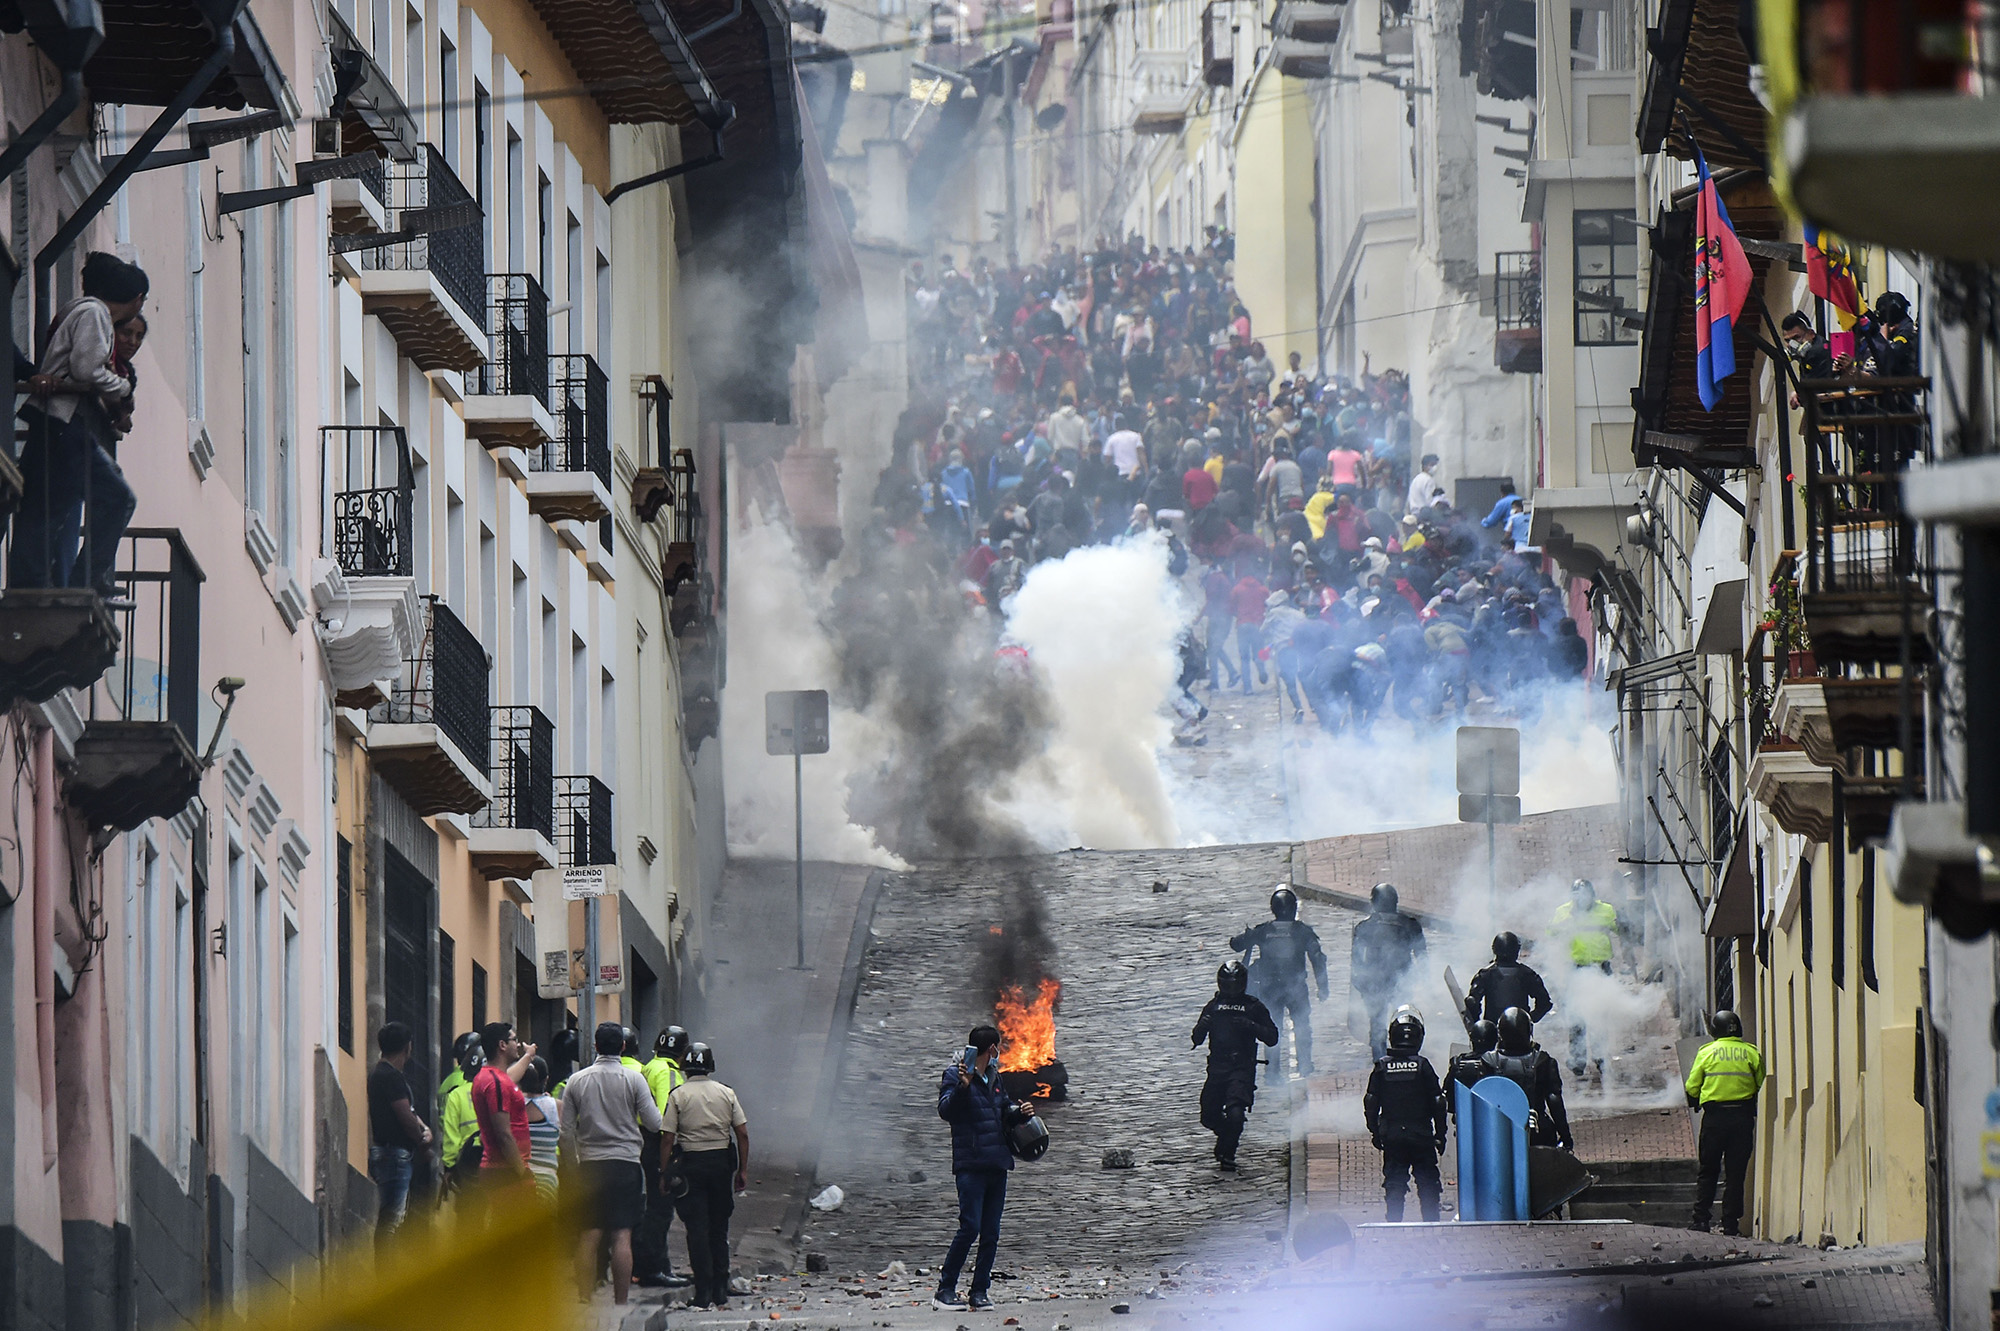 Riot police confront demonstrators during clashes in Quito on Oct. 9.